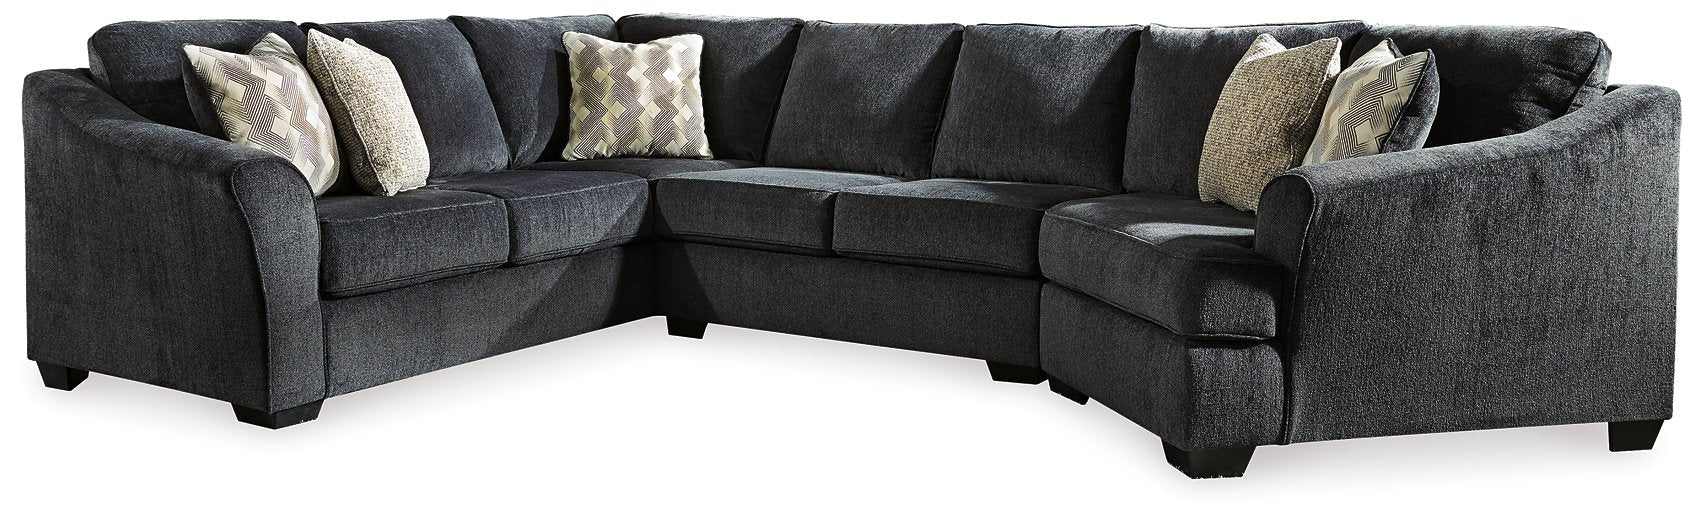 Eltmann Sectional with Cuddler Sectional Ashley Furniture